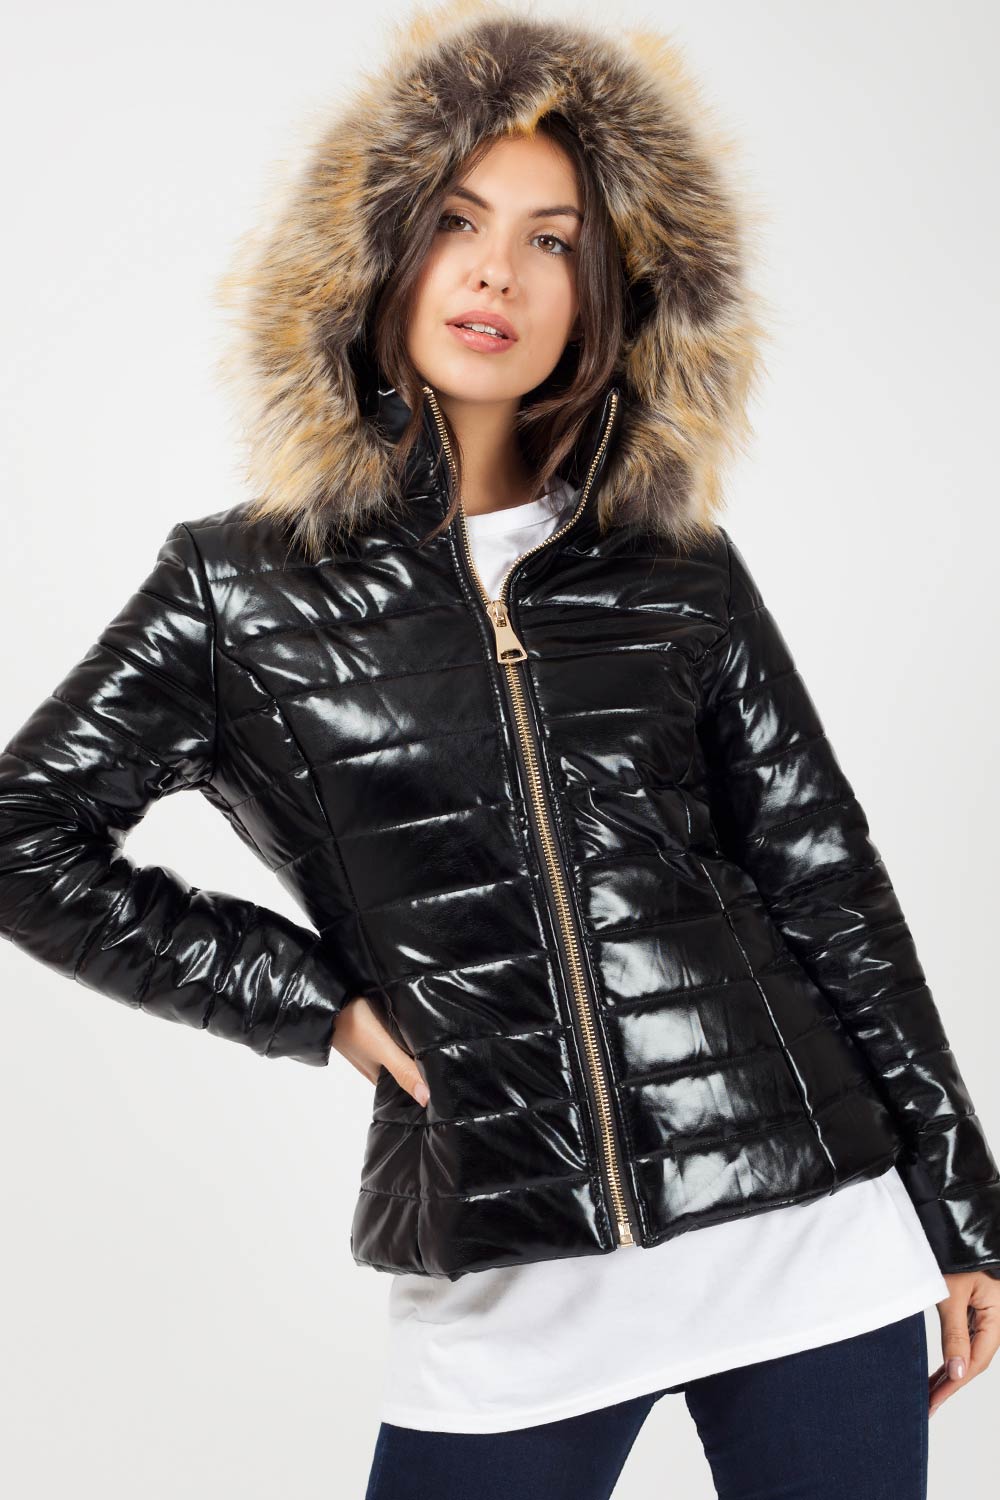 Black Shiny Puffer Coat With Hood : Women's Puffer Quilted Black Wet ...